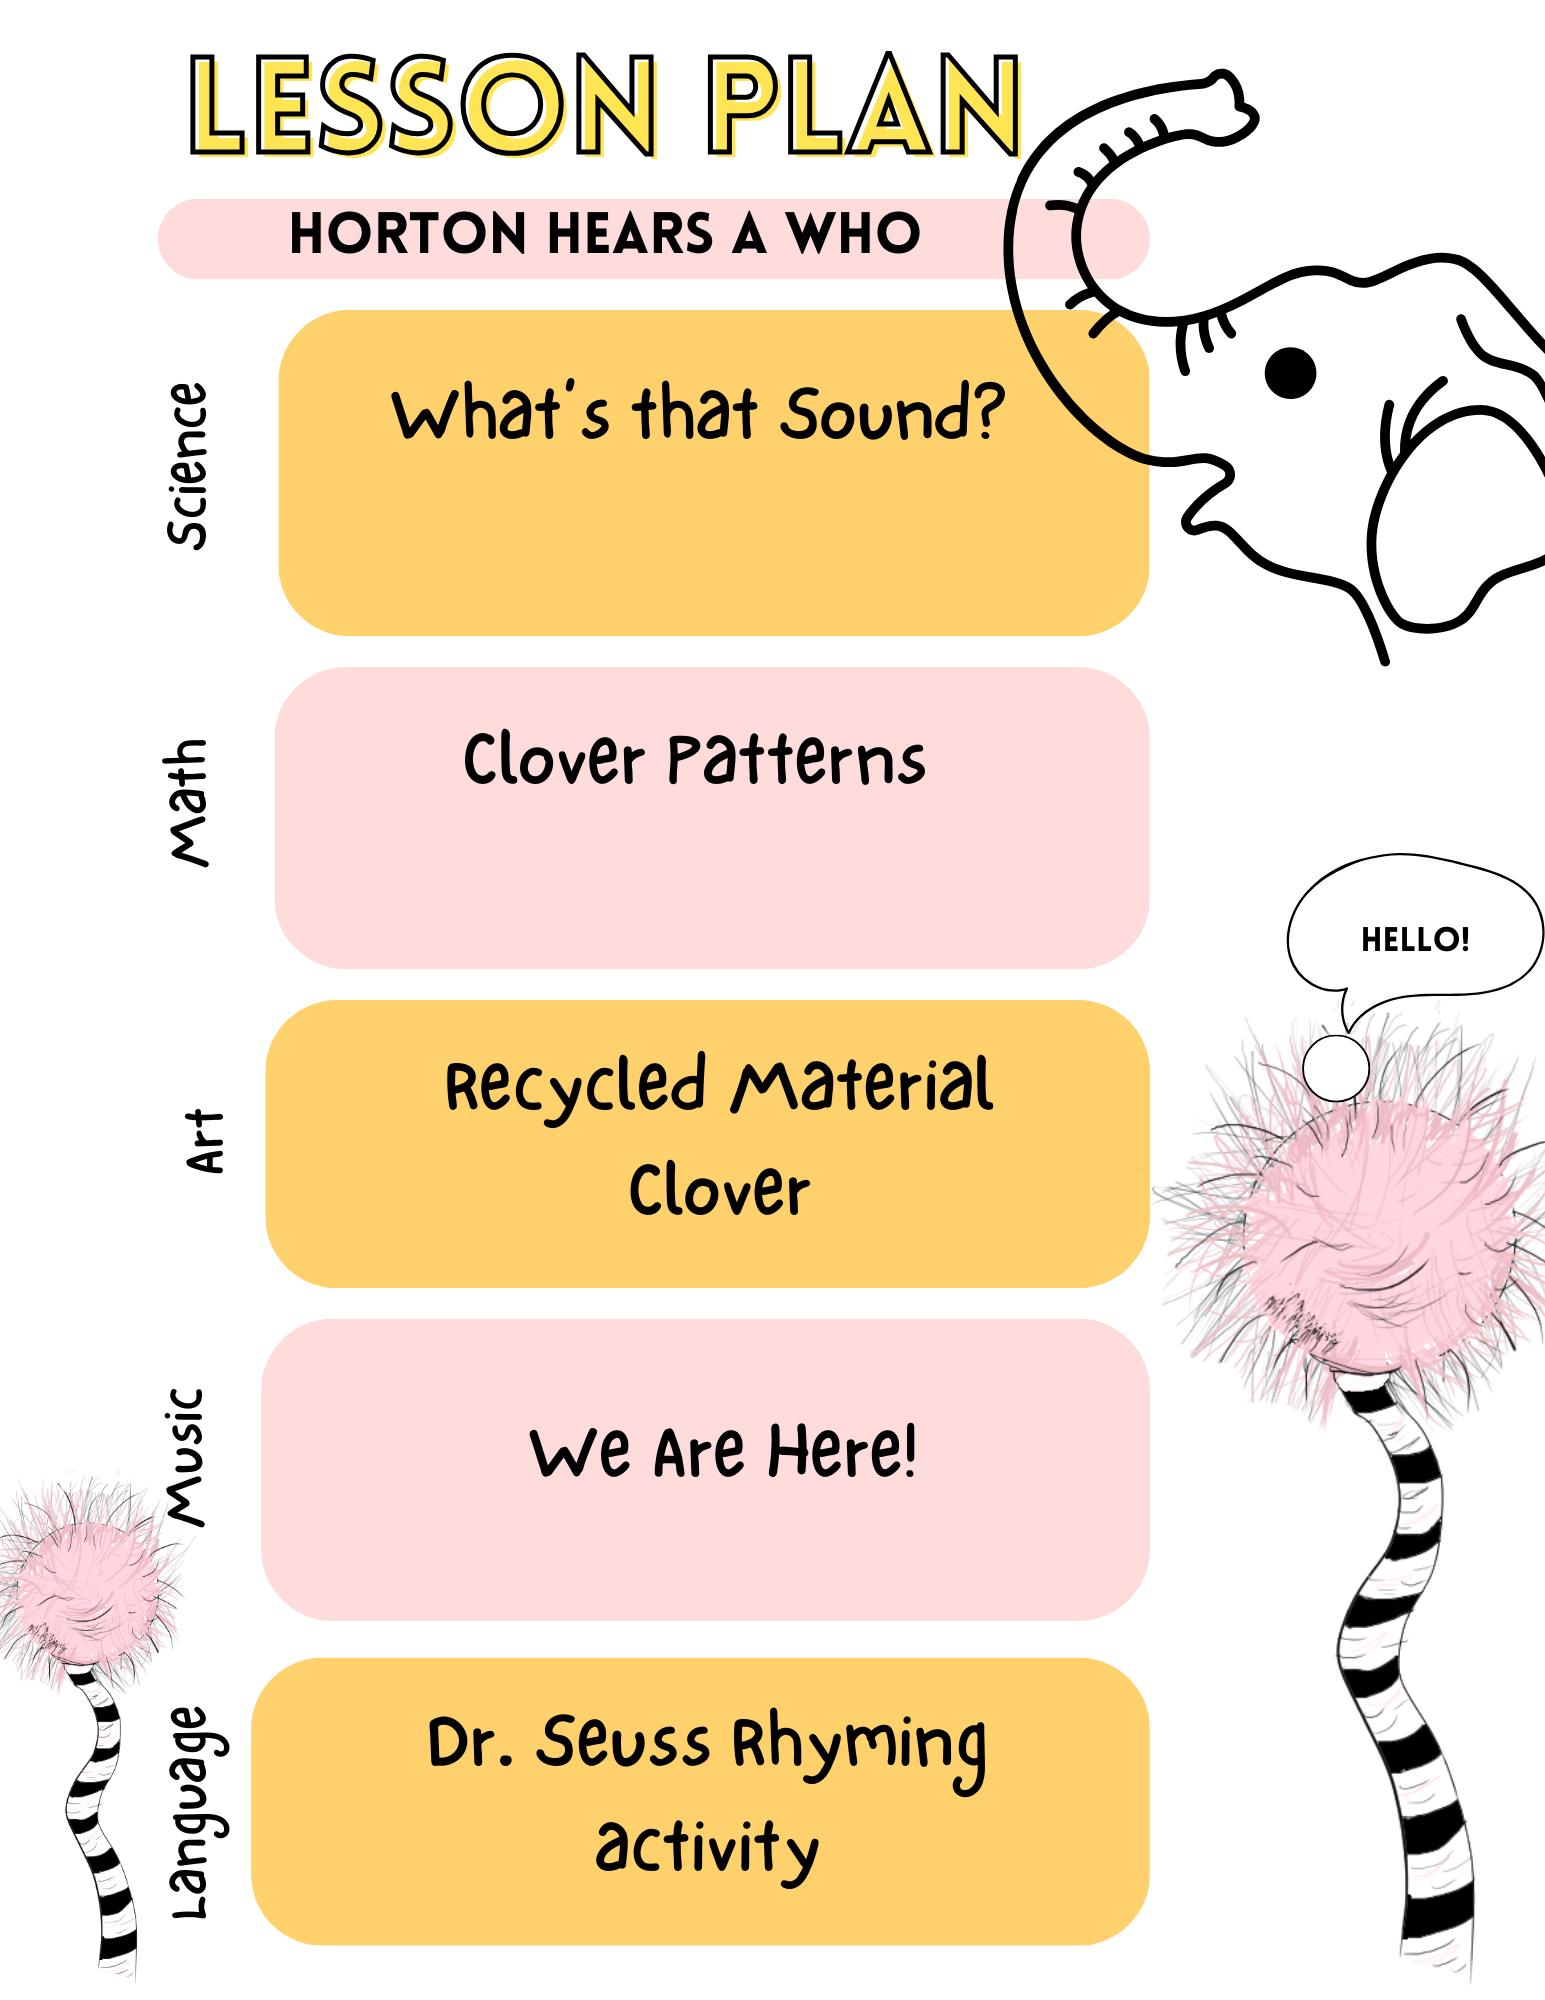 Lesson plan for Horton Hears a who